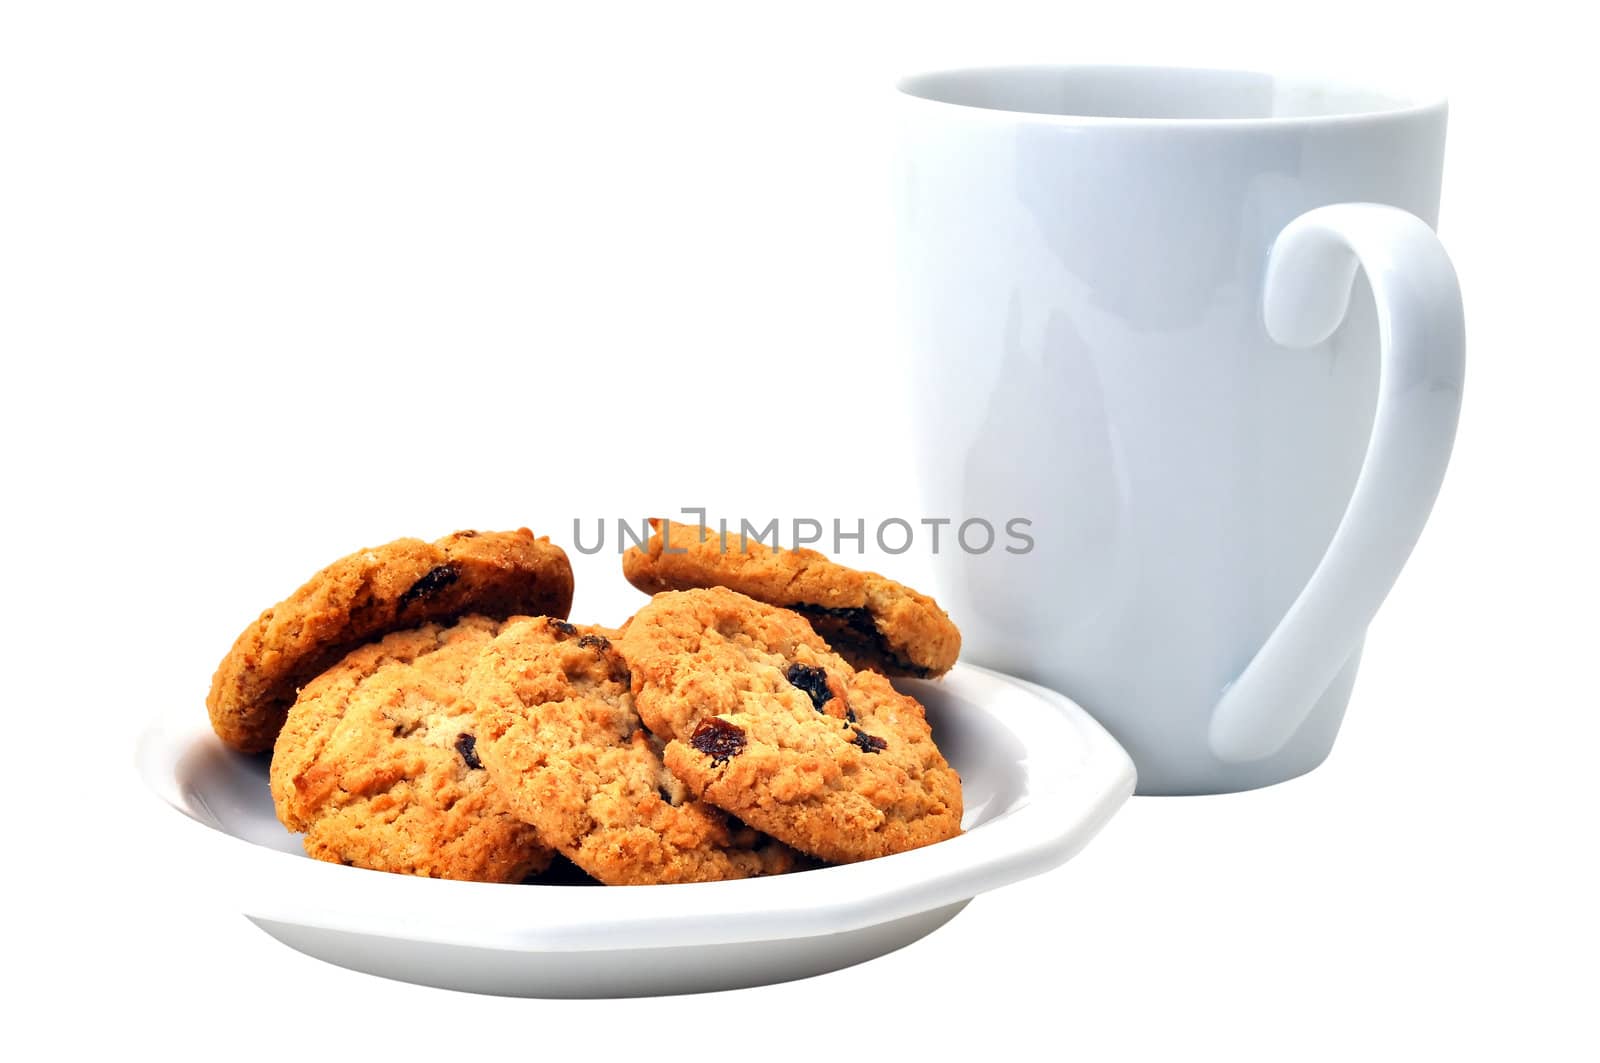 Oatmeal cookies on plate and coffee  isolated on white background with clipping path.